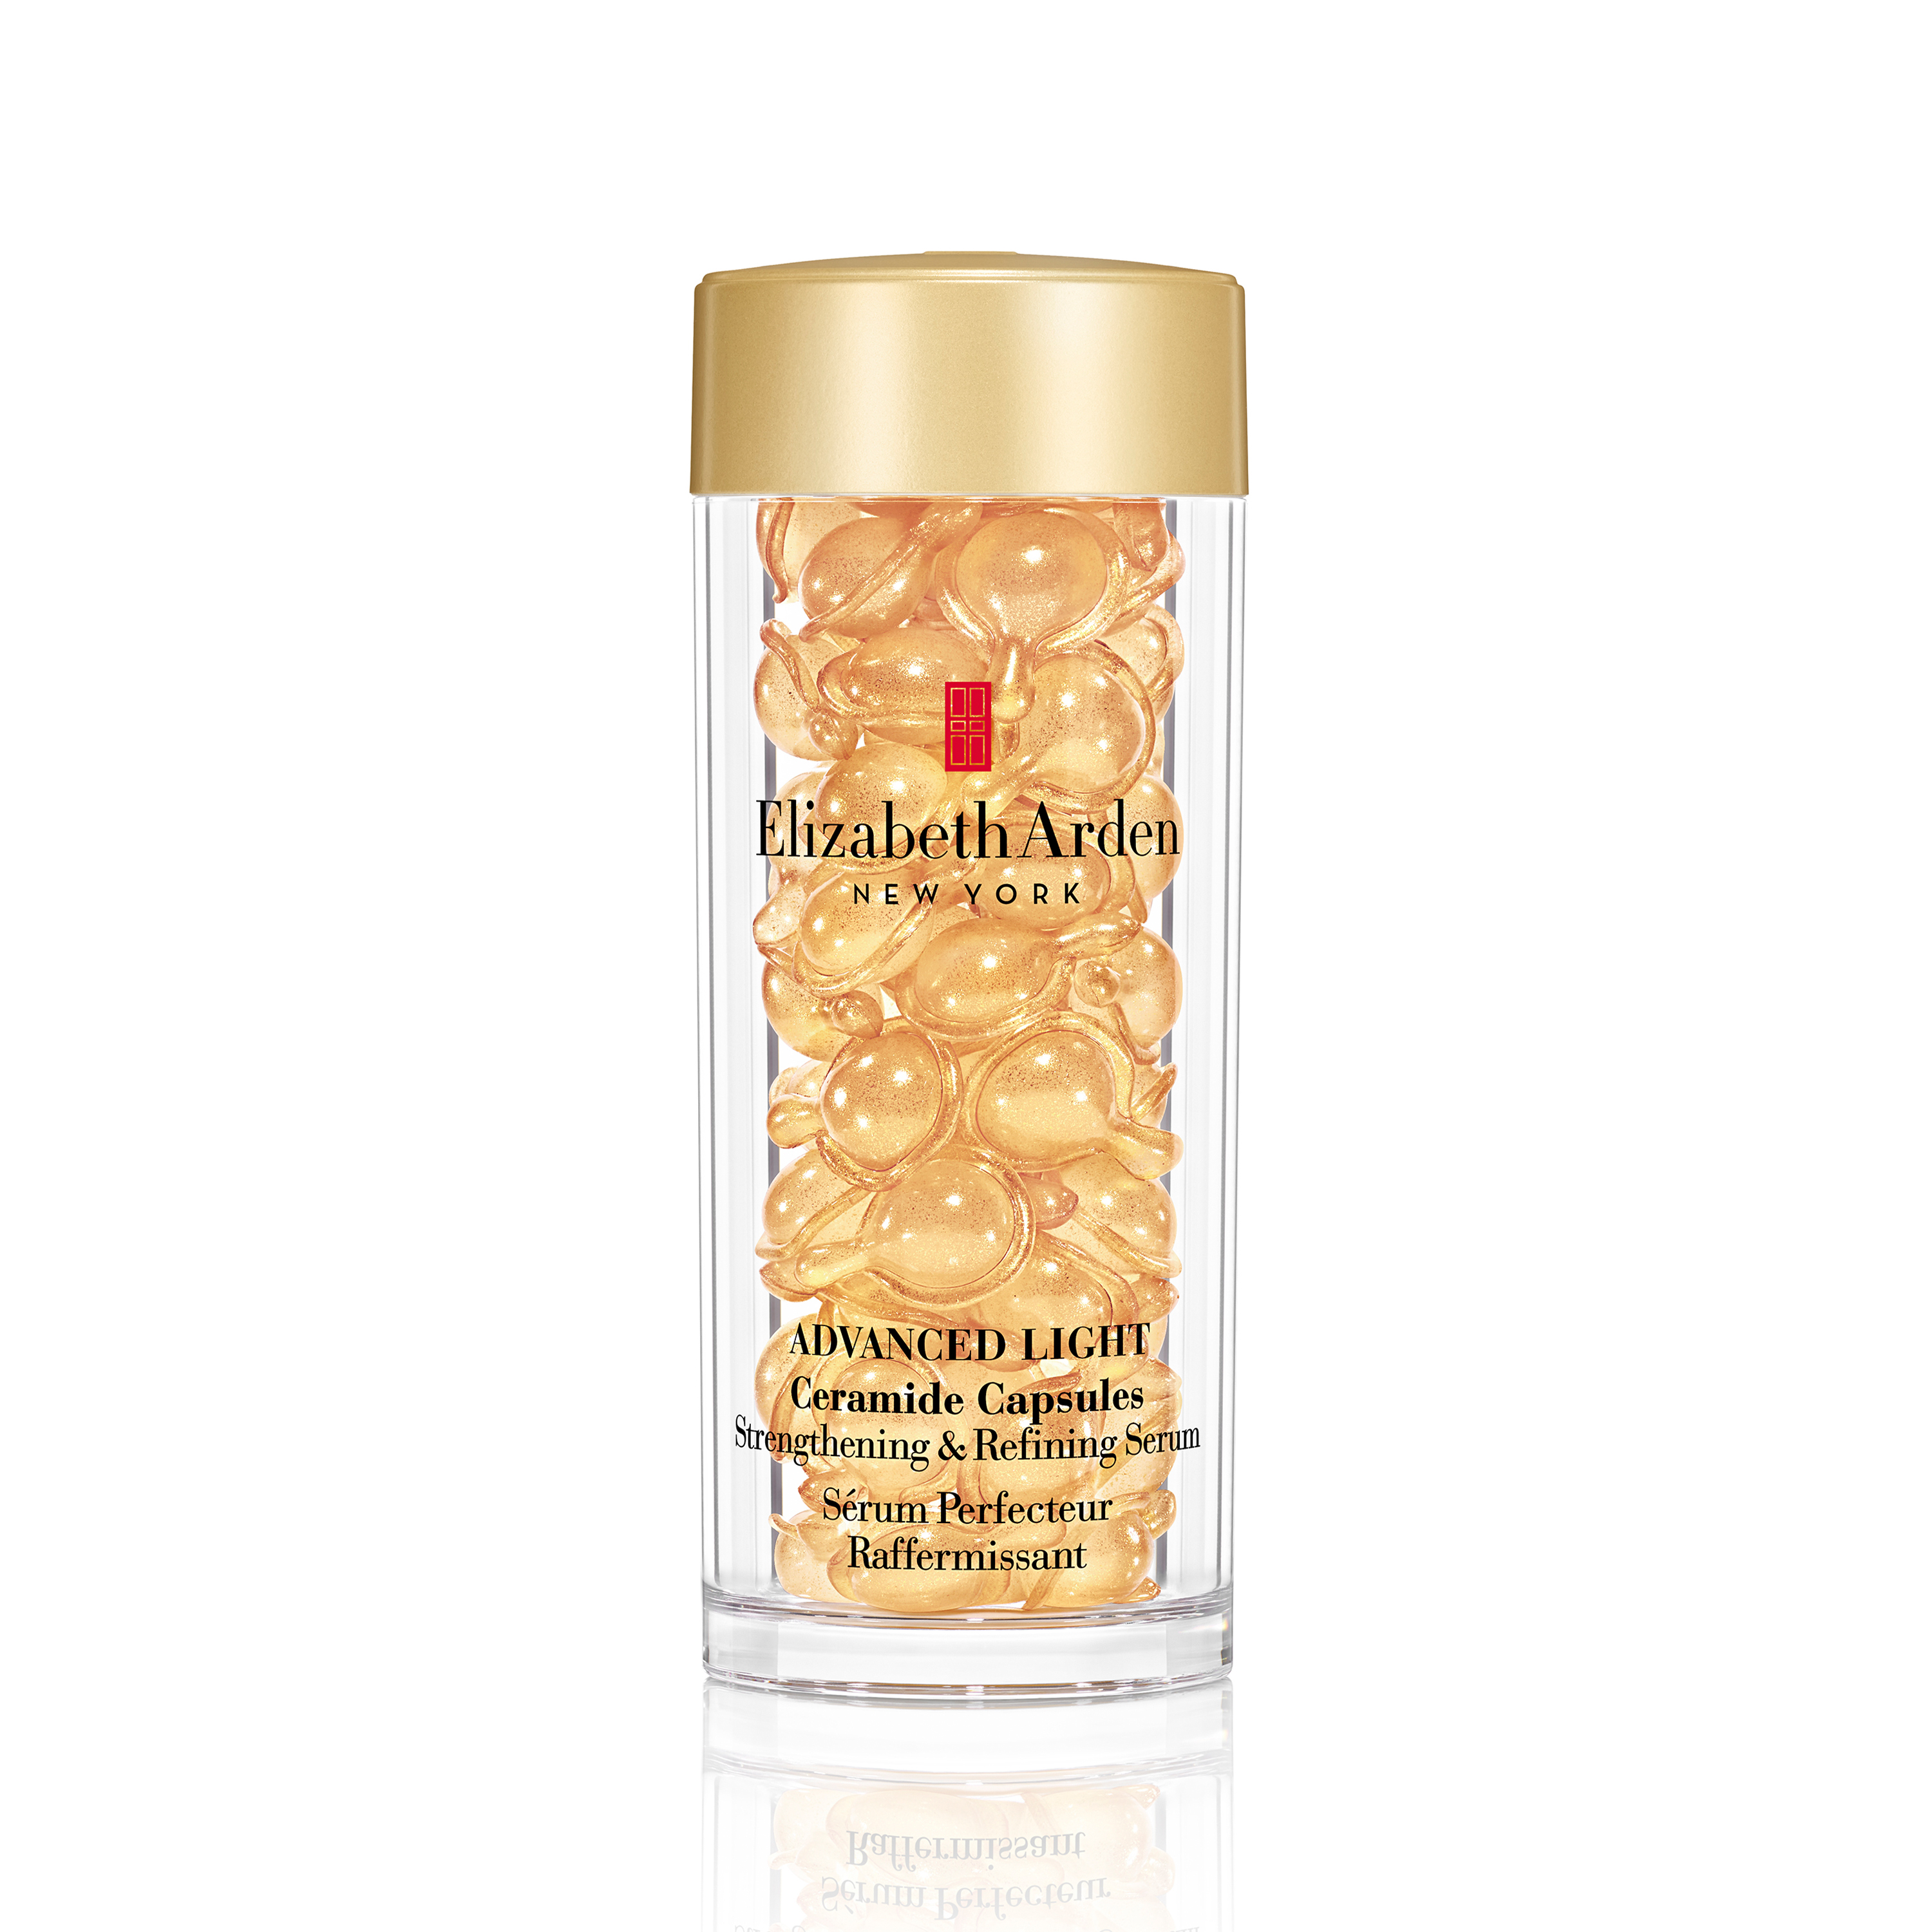 Advanced Light Ceramide Capsules, by Elizabeth Arden (€112).  Youth perfecting serum that reinforces the skin barrier and leaves the skin smooth and radiant.